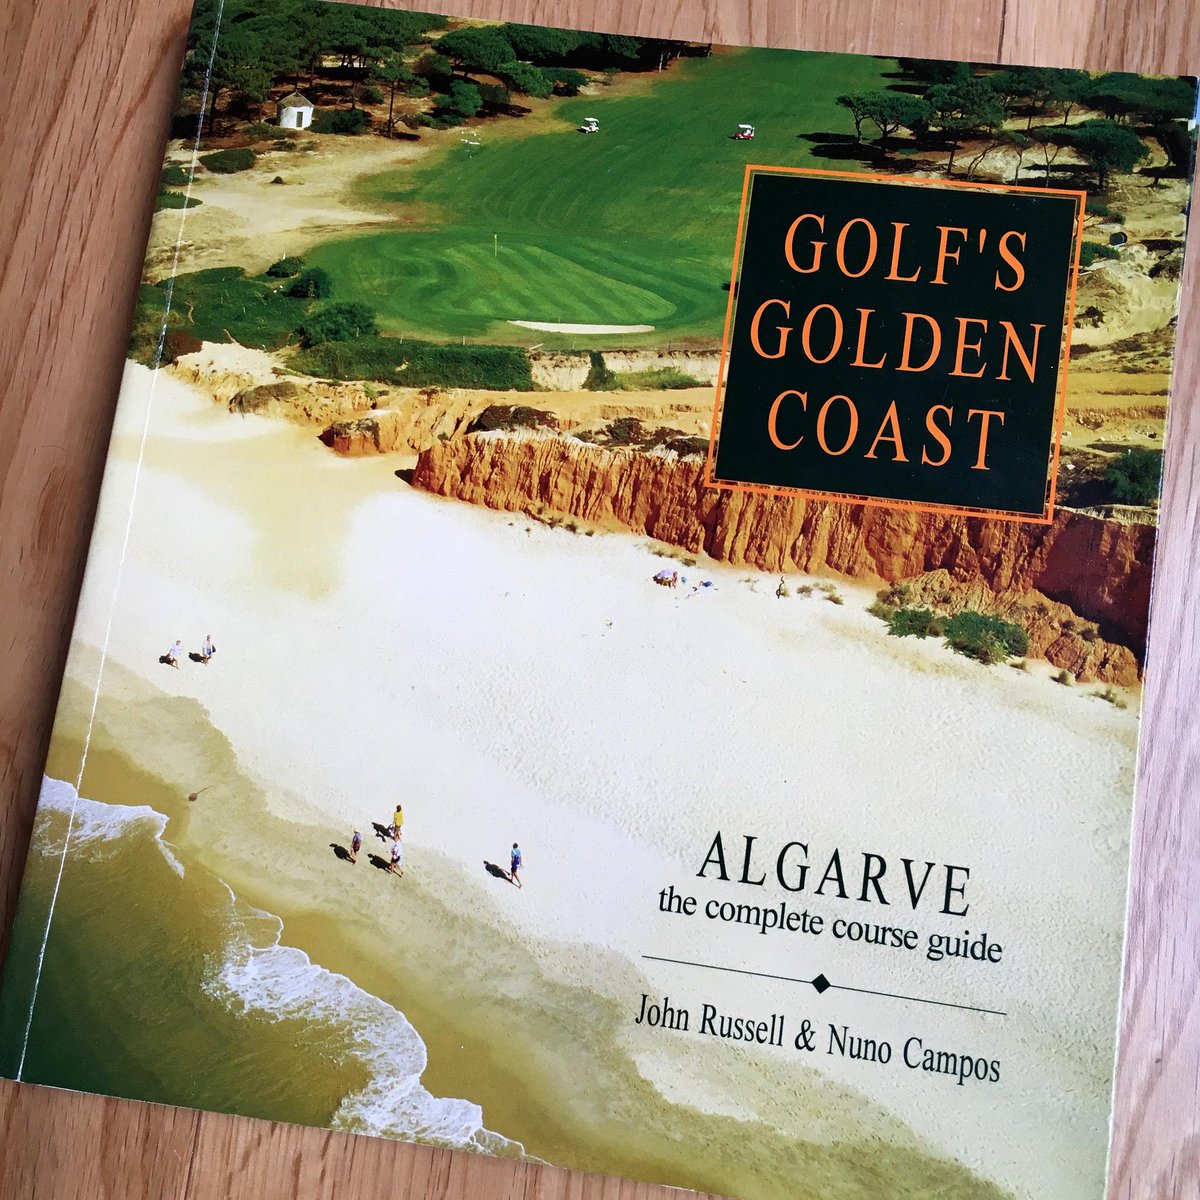 Sharing my lovely dad’s book “Golf’s Golden Coast” @JohnRussellGolf for #WorldBookDay. A guide of #golf courses in the Algarve, Portugal, with photos by Nuno Campos. #golf #GolfBook #Algarve #Portugal #GolfHistory #BestOfPortugal 
📚⛳️🇵🇹